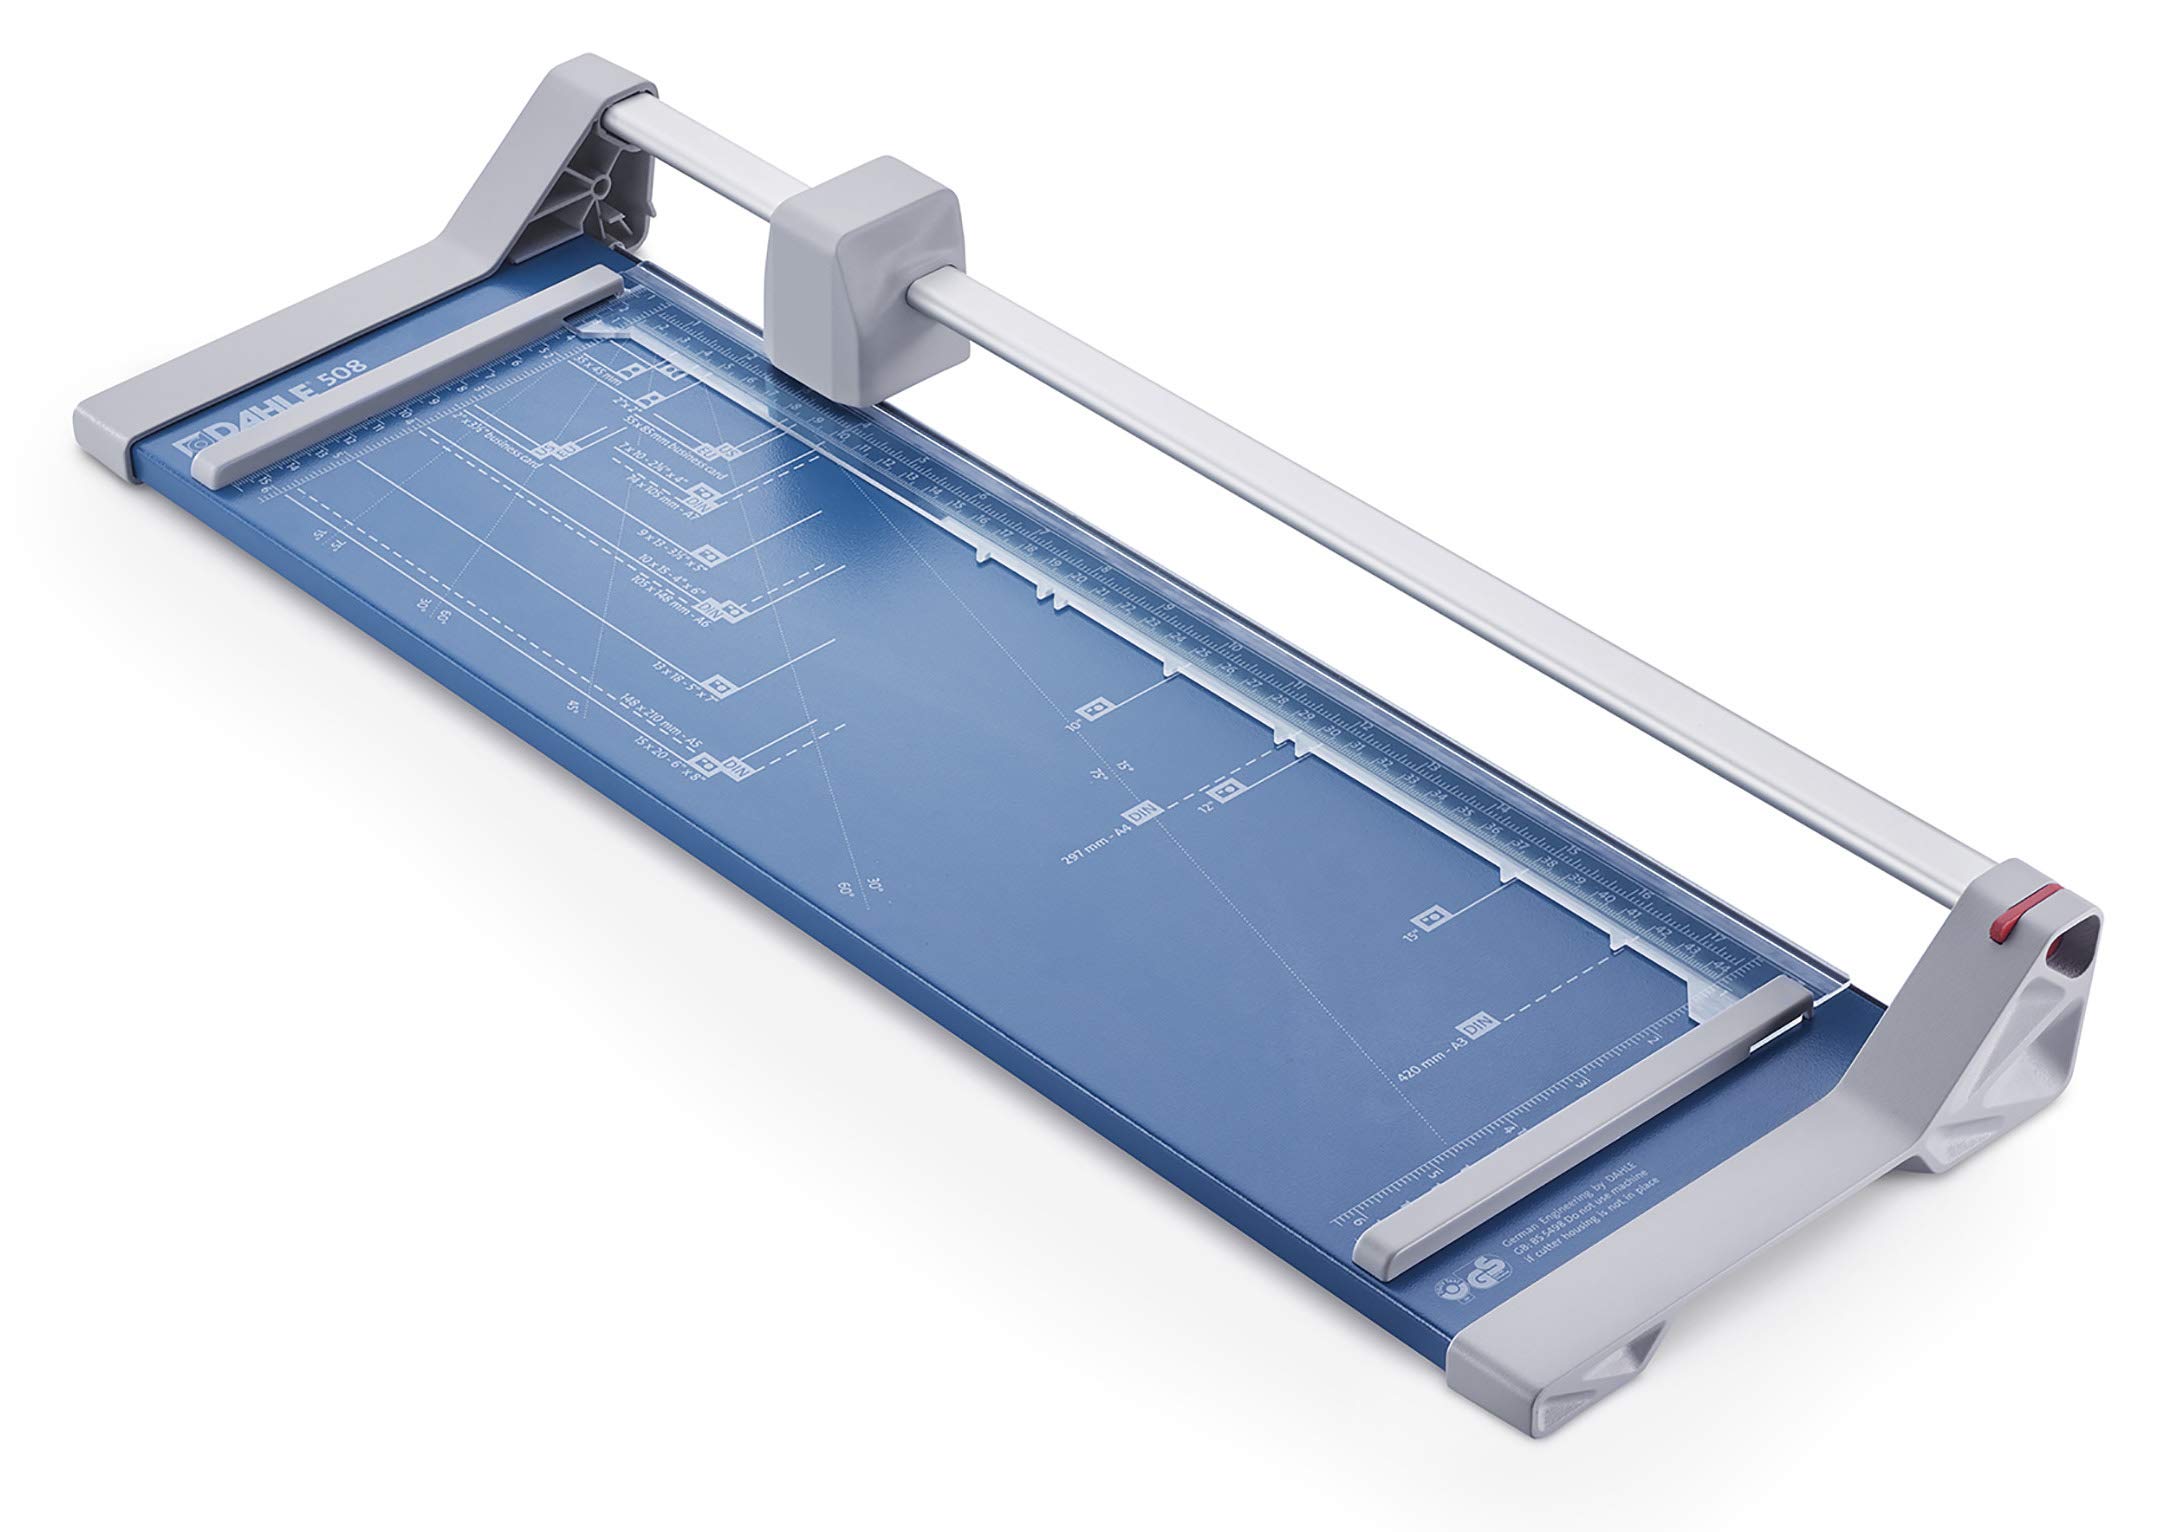 Dahle 508 Personal Rotary Trimmer, 18" Cut Length, 5 Sheet Capacity, Self-Sharpening, Automatic Clamp, German Engineered Paper C